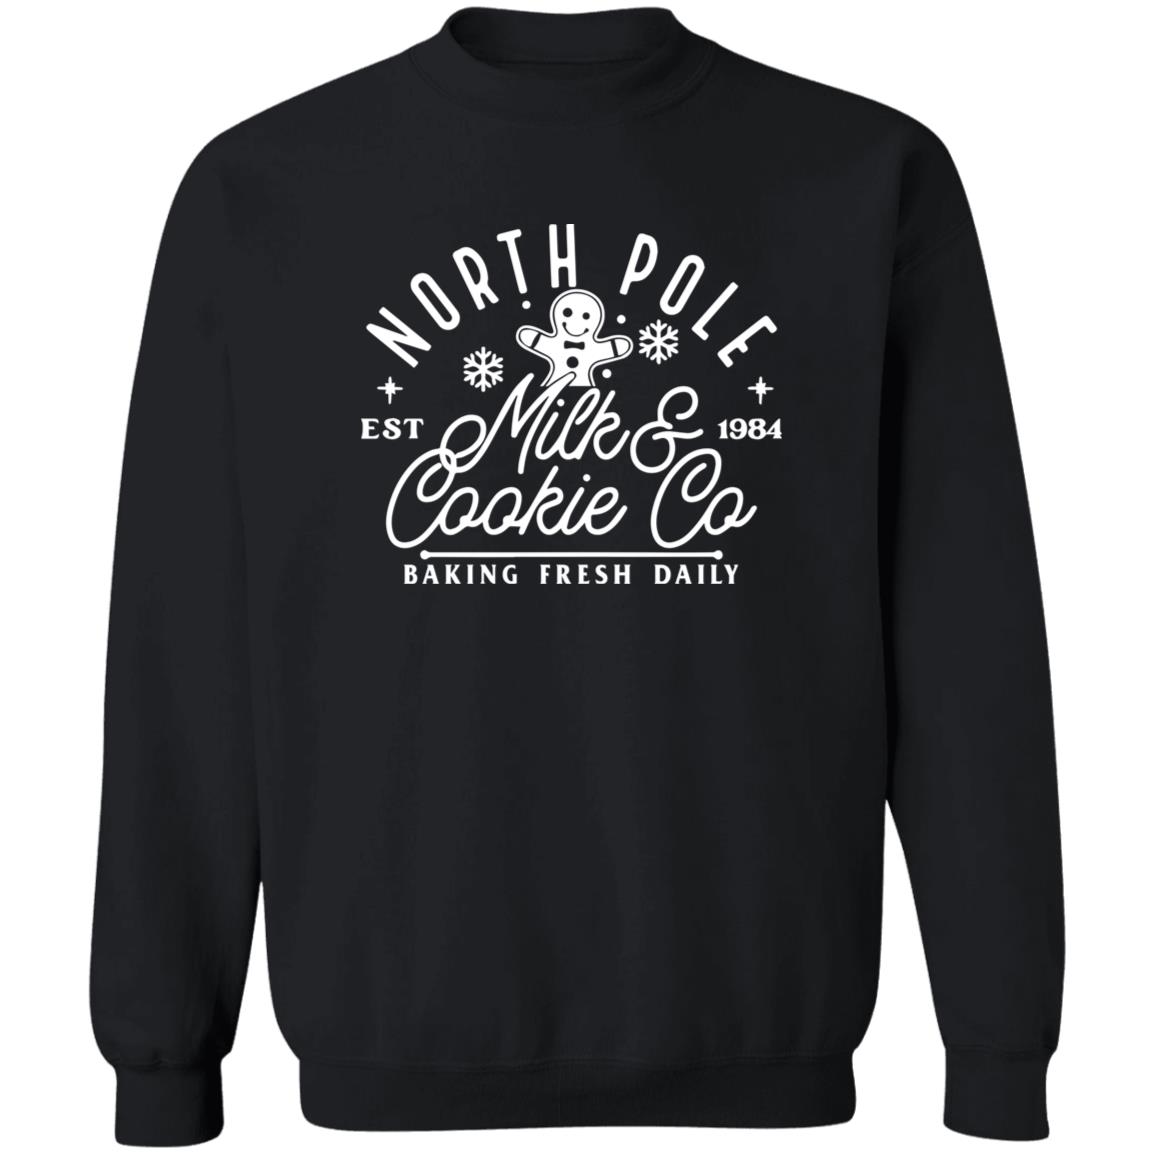 Gingerbread North Pole Milk And Cookie Co Baking Fresh Daily Shirt 2